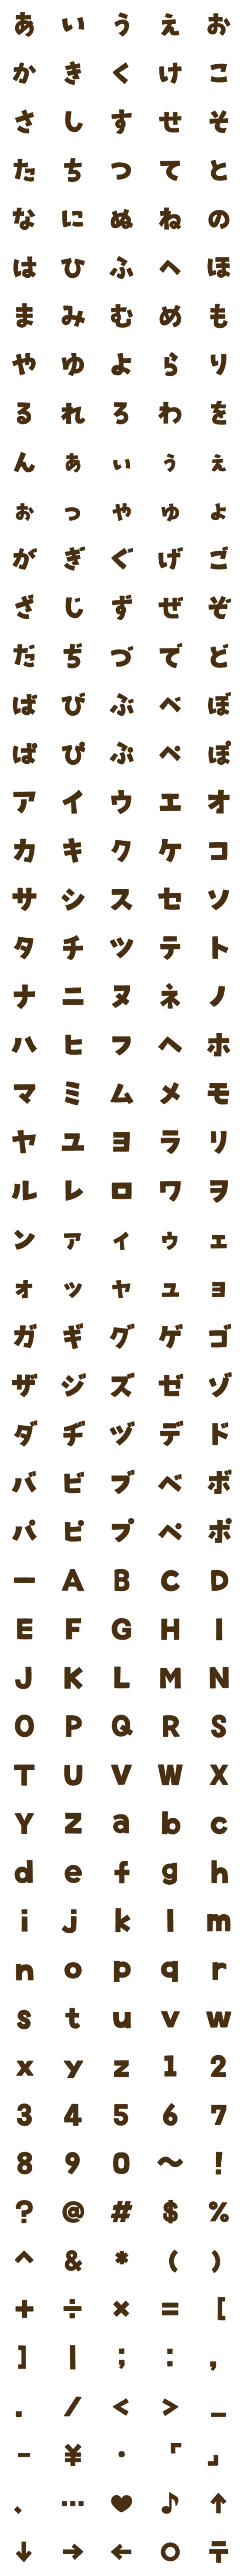 [LINE絵文字]便利！強調文字詰め合わせの画像一覧